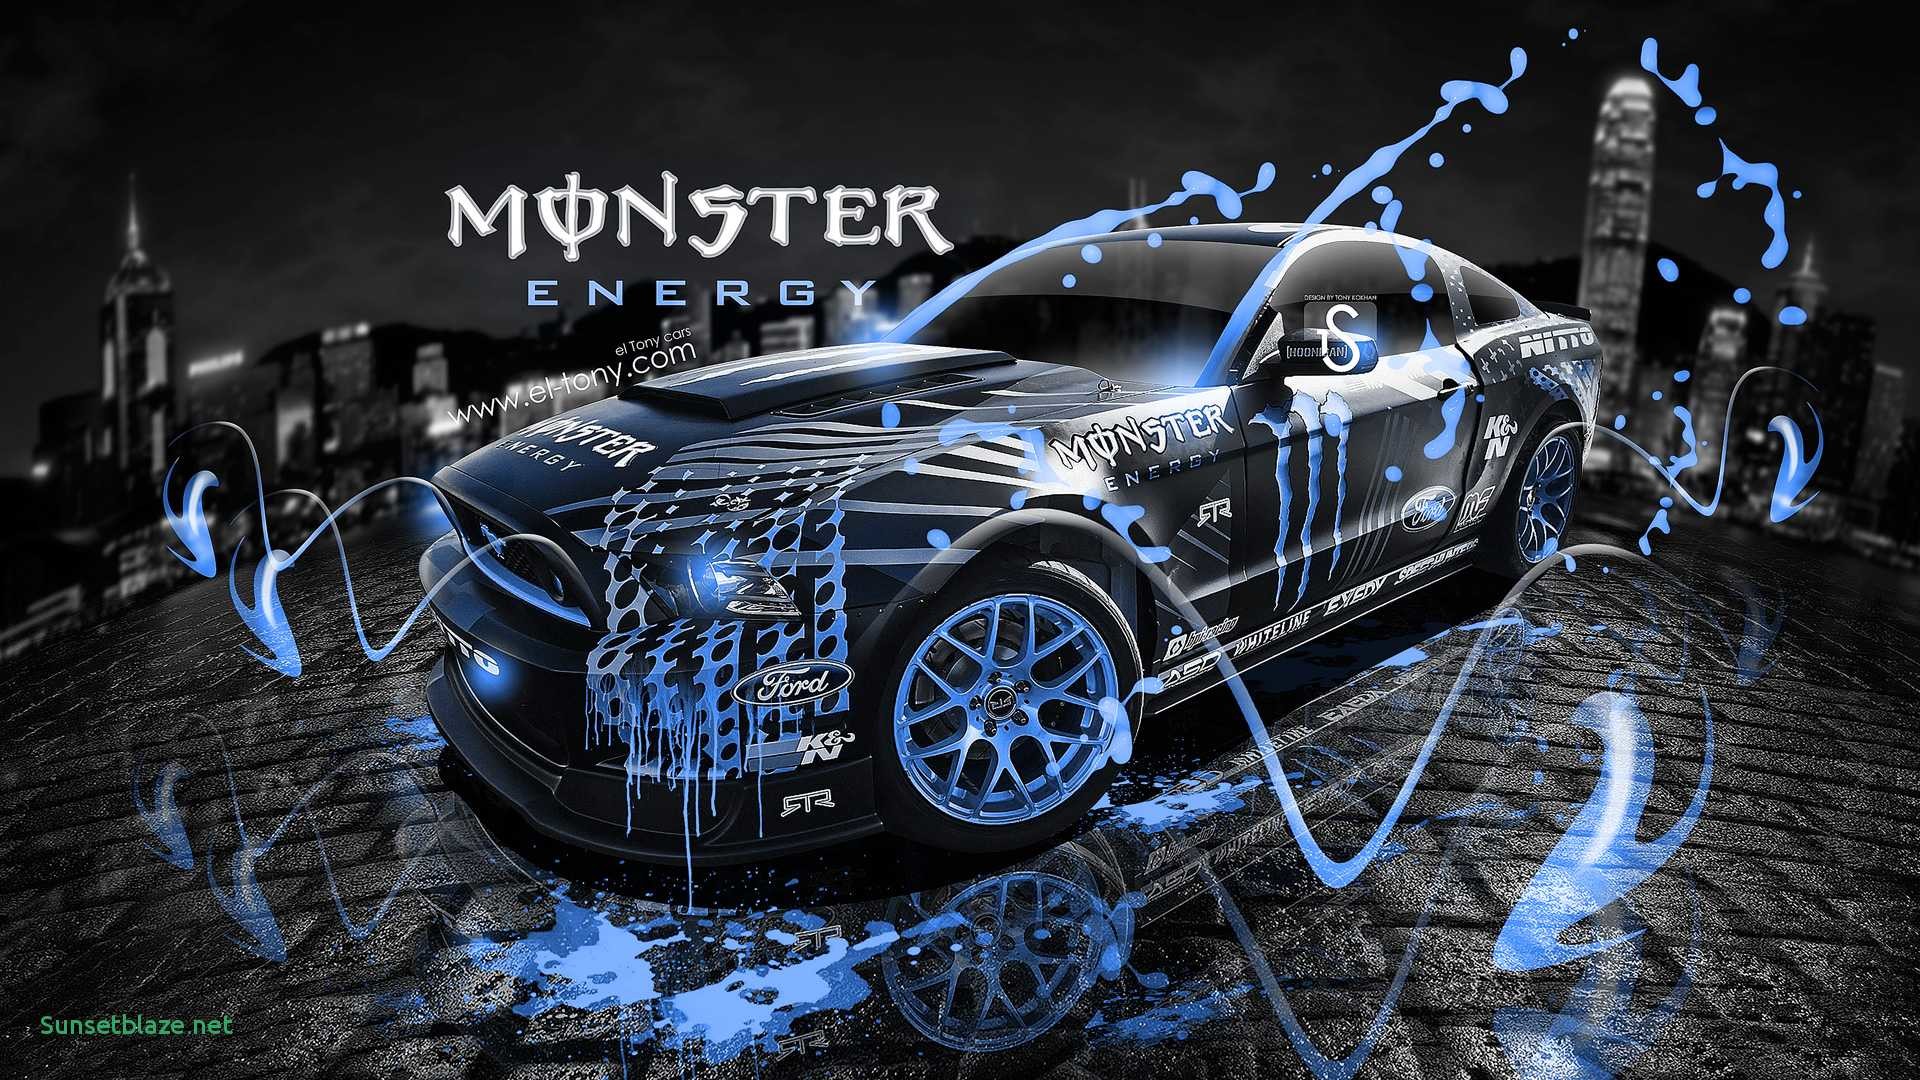 1920x1080 Monster Energy Wallpaper Qygjxz Awesome Of Monster Energy Cars Hd Wallpapers